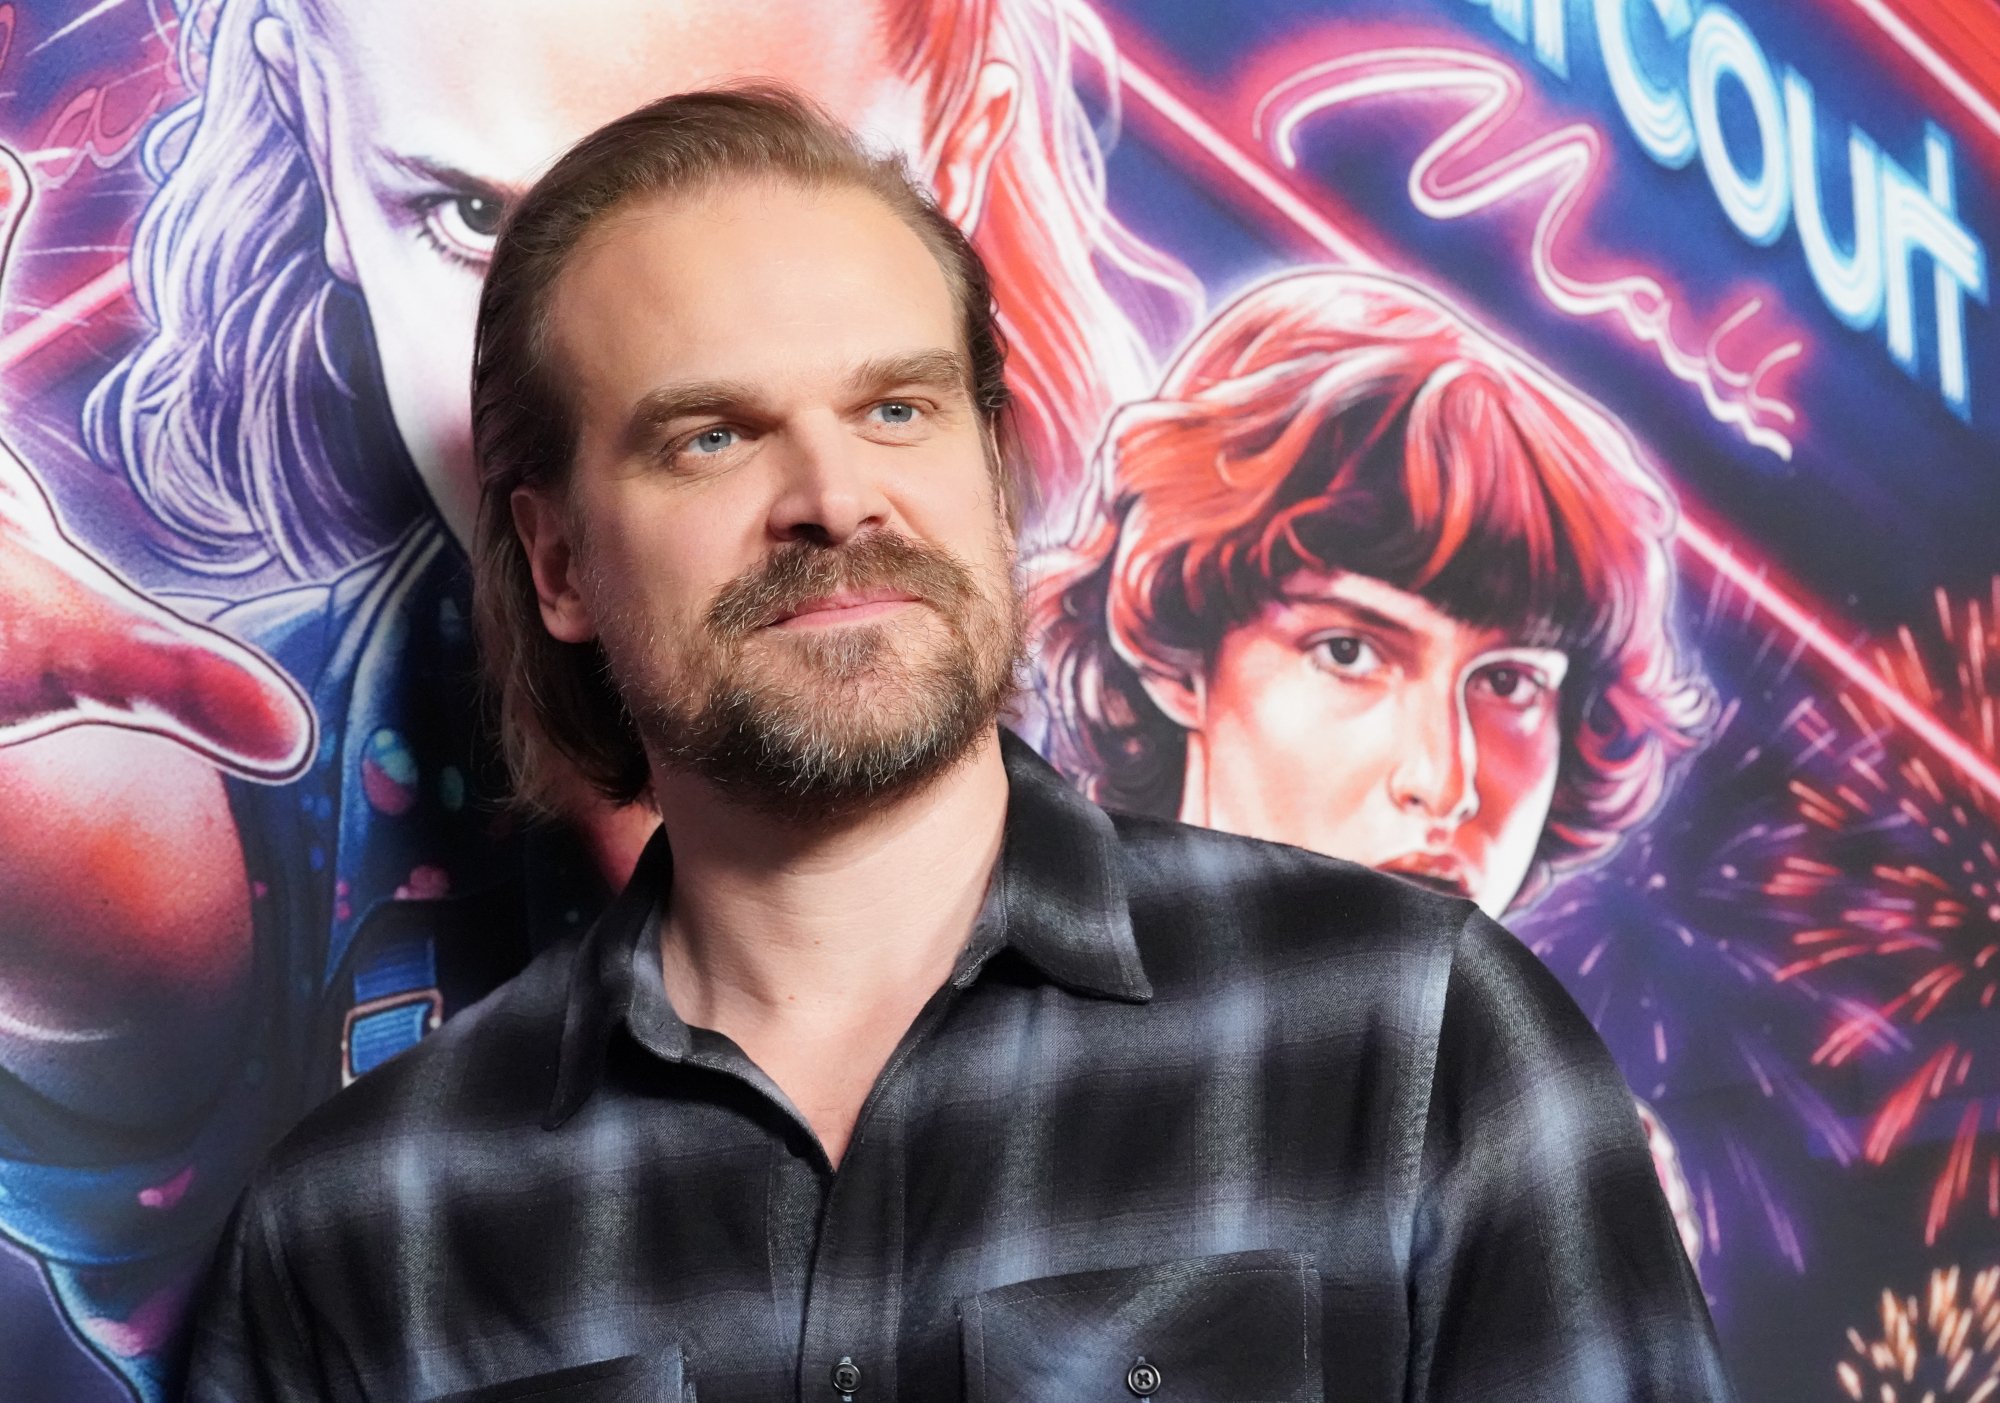 Stranger Things star David Harbour wearing a black and white flannel shirt and standing in front of a Stranger Things wall